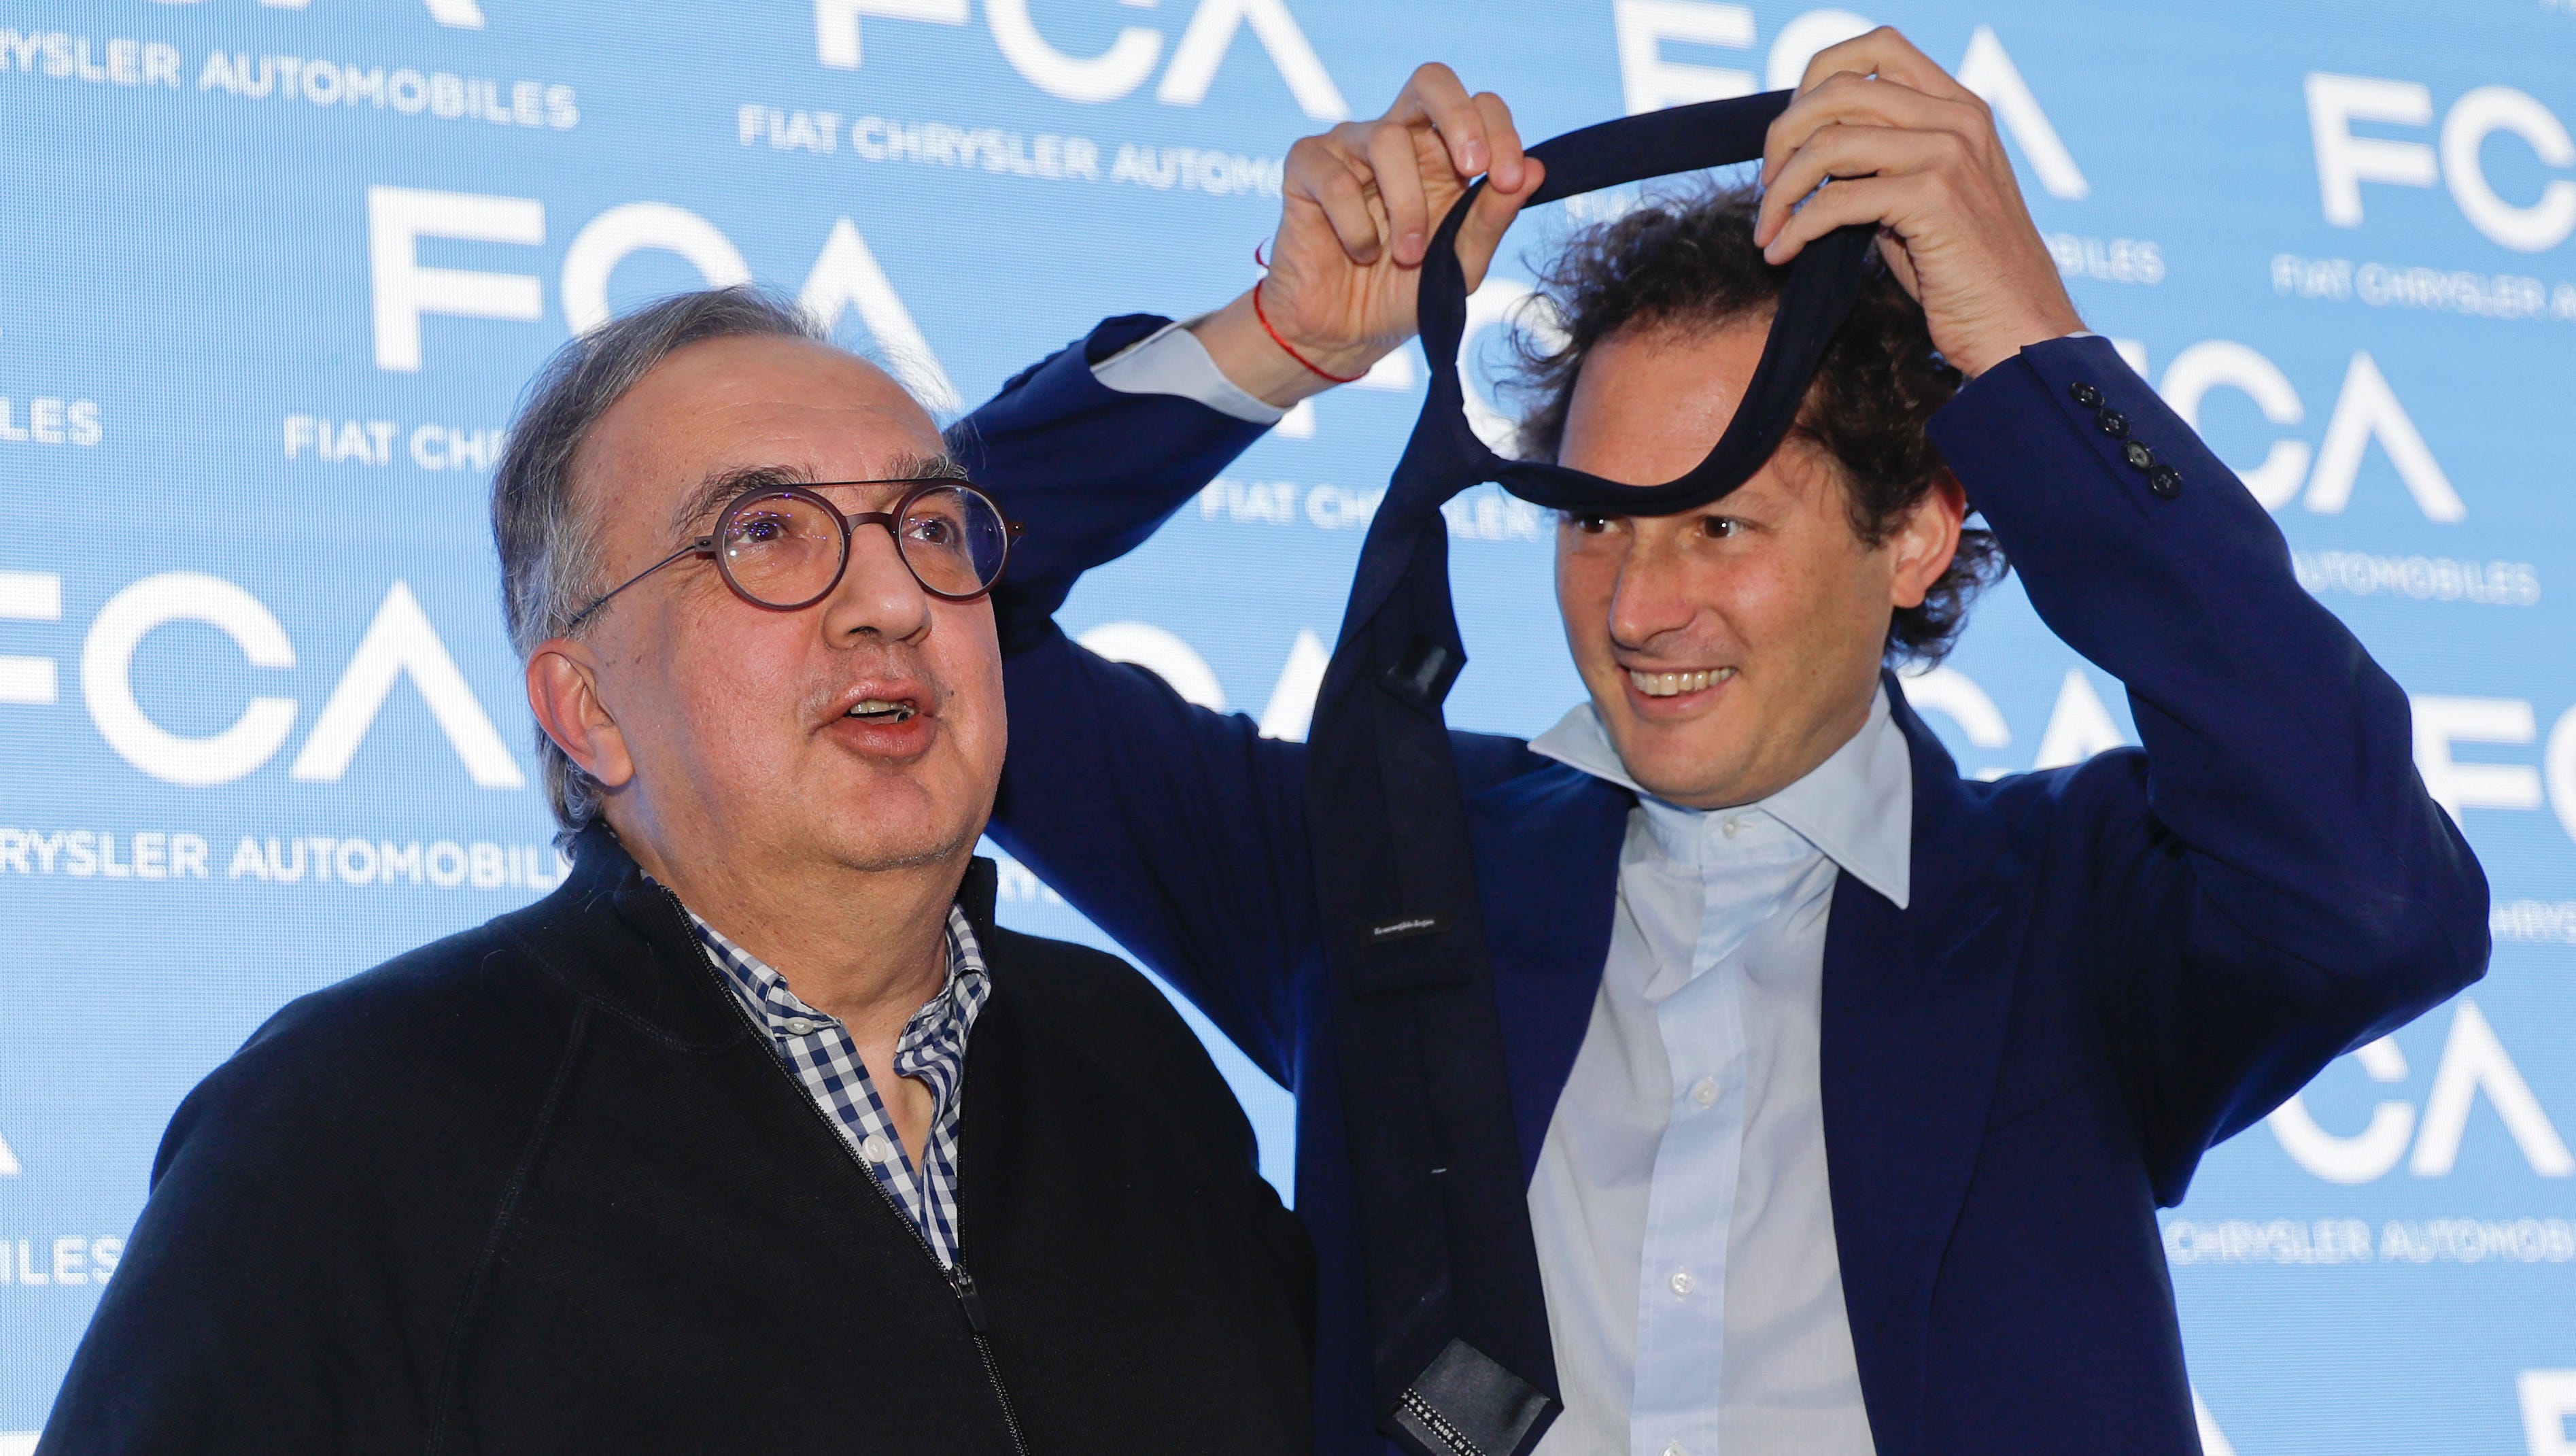 John Elkann, president of the FCA Italy group, right, gives his necktie to the famously tie-less Fiat Chrysler CEO Sergio Marchionne prior to a press conference in Balocco, Italy, Friday, June 1, 2018. In his last big presentation as CEO of Fiat Chrysler before retiring, Marchionne announced a big investment push to make more electrified cars, while acknowledging that traditional engines will continue to dominate production for some time.